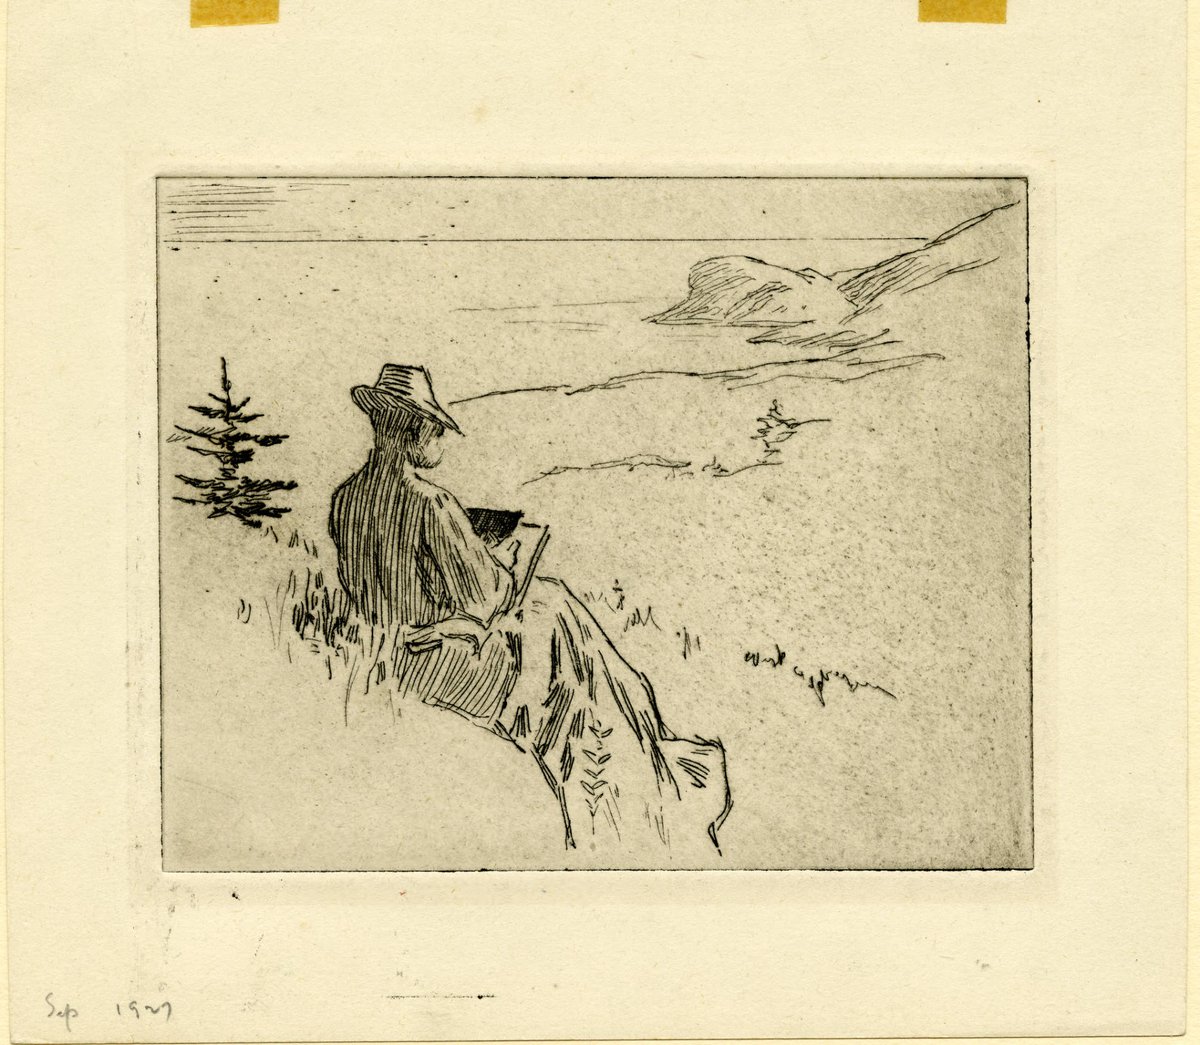 Steele's image, "Dr. Lombard sketching Gull Rock," from  @SherlockUMN  @umnlib hints at something we may do while sheltering in place,  #WFH: renew an interest in something previously put aside like drawing, playing an instrument, knitting, or other hobbies.  http://purl.umn.edu/99530 